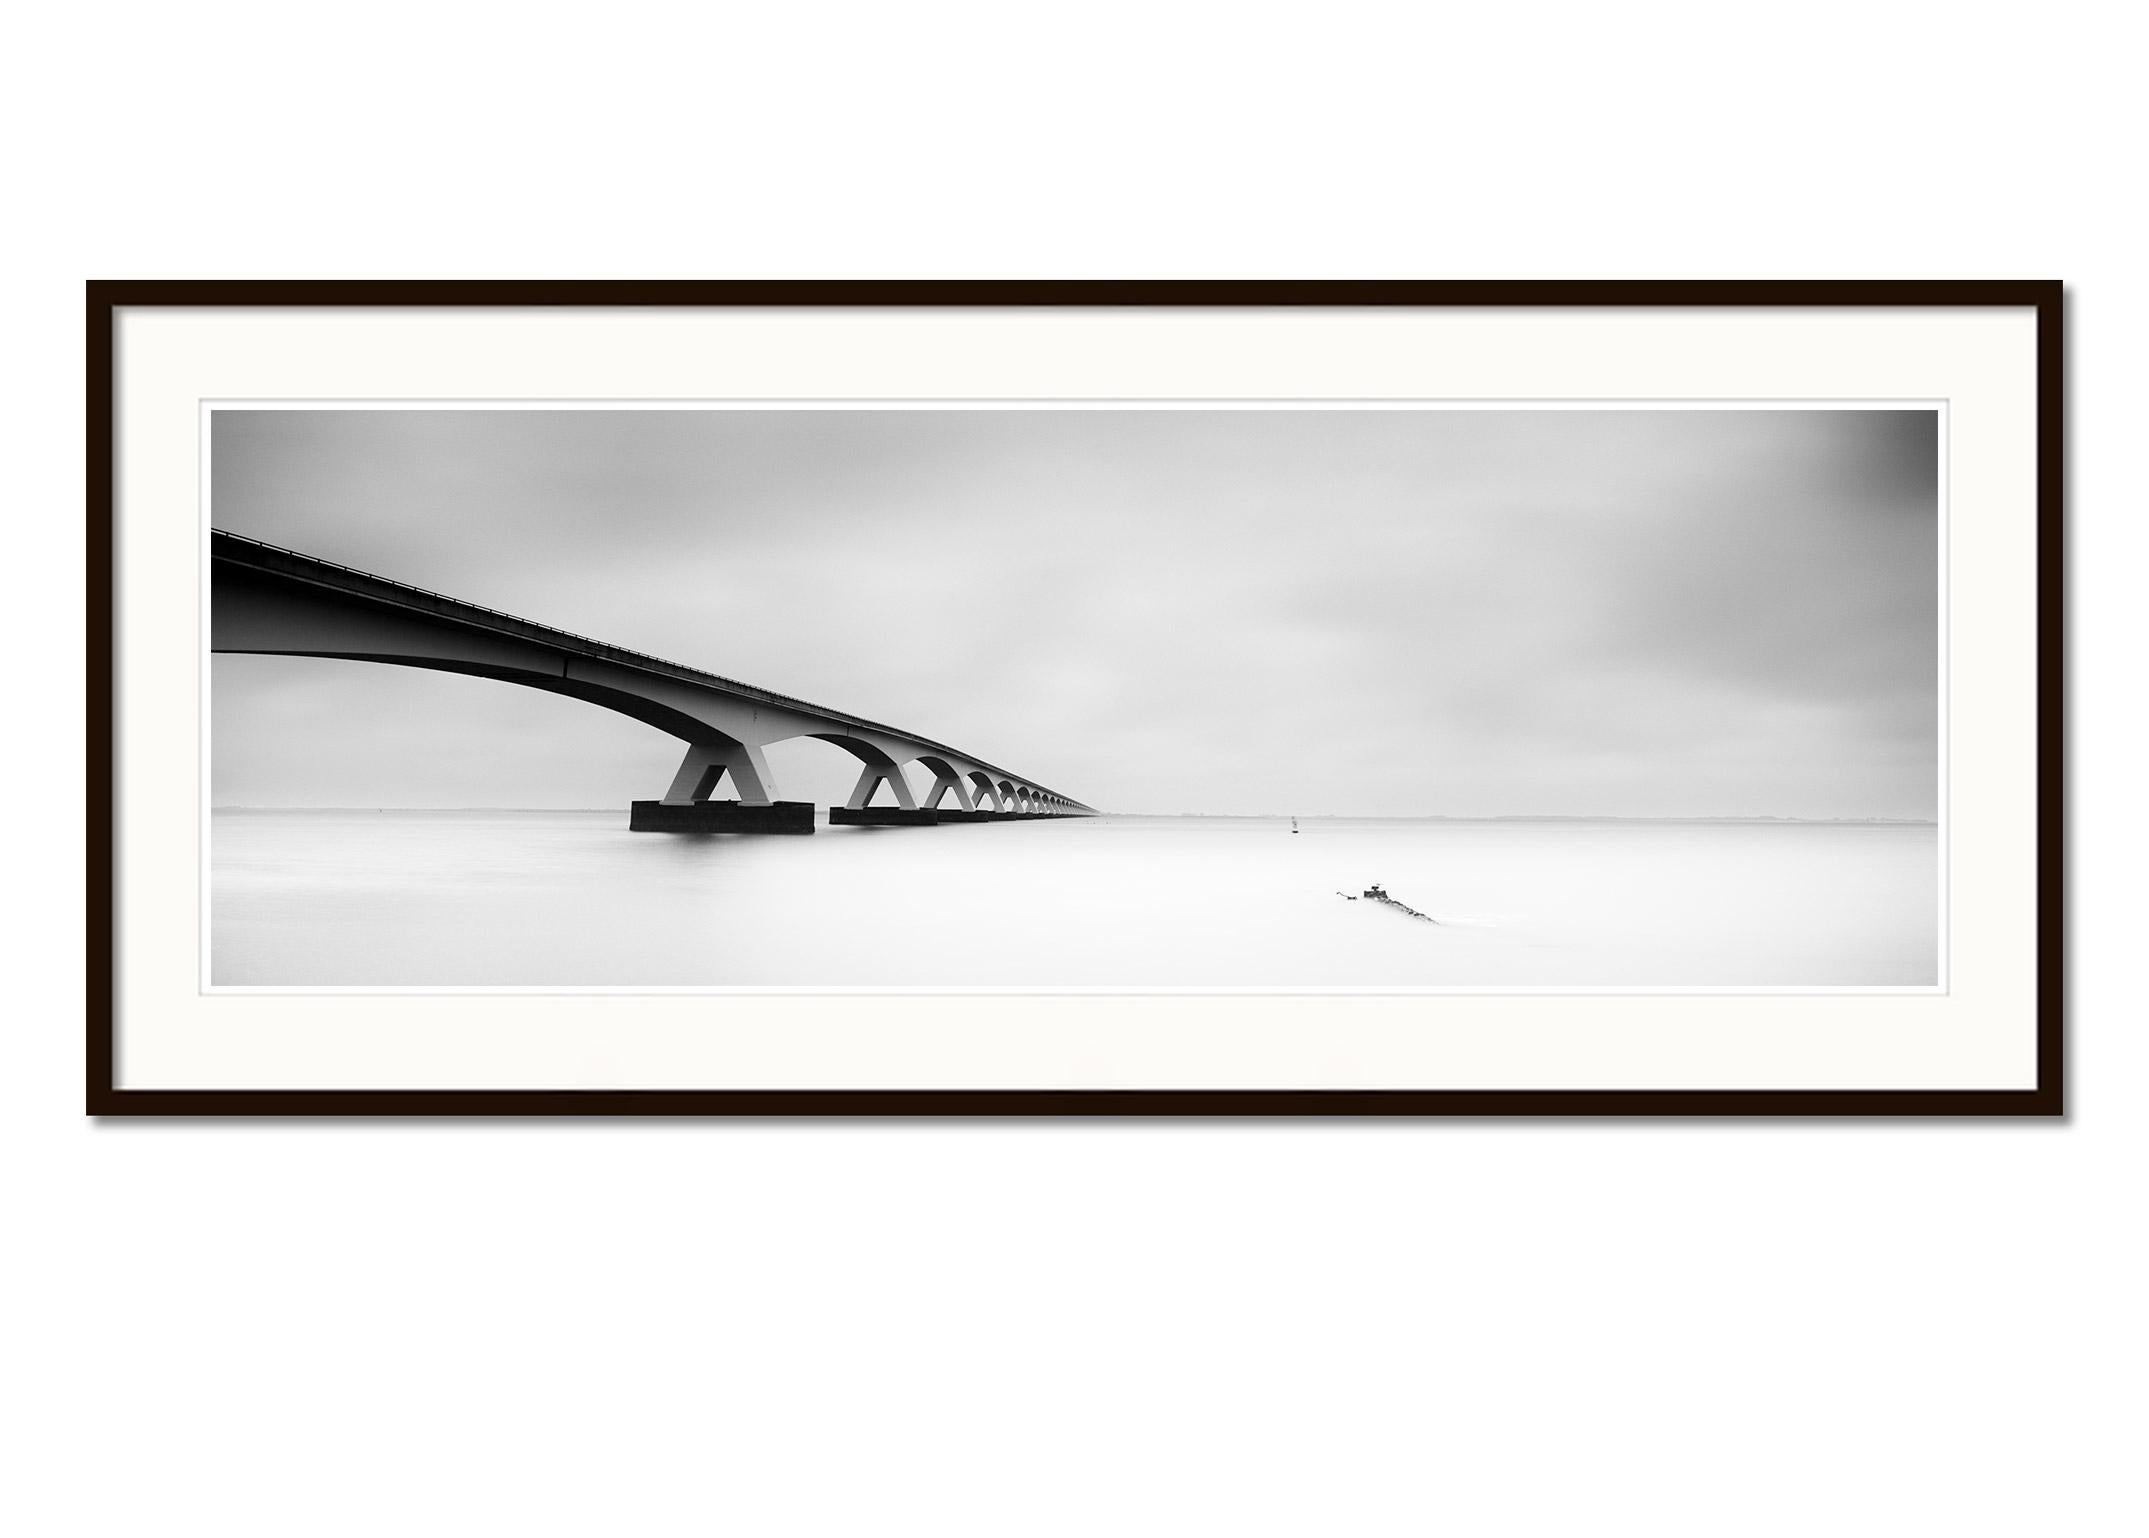 Zeeland Bridge Panorama, Netherlands, black and white waterscape art photography - Gray Landscape Photograph by Gerald Berghammer